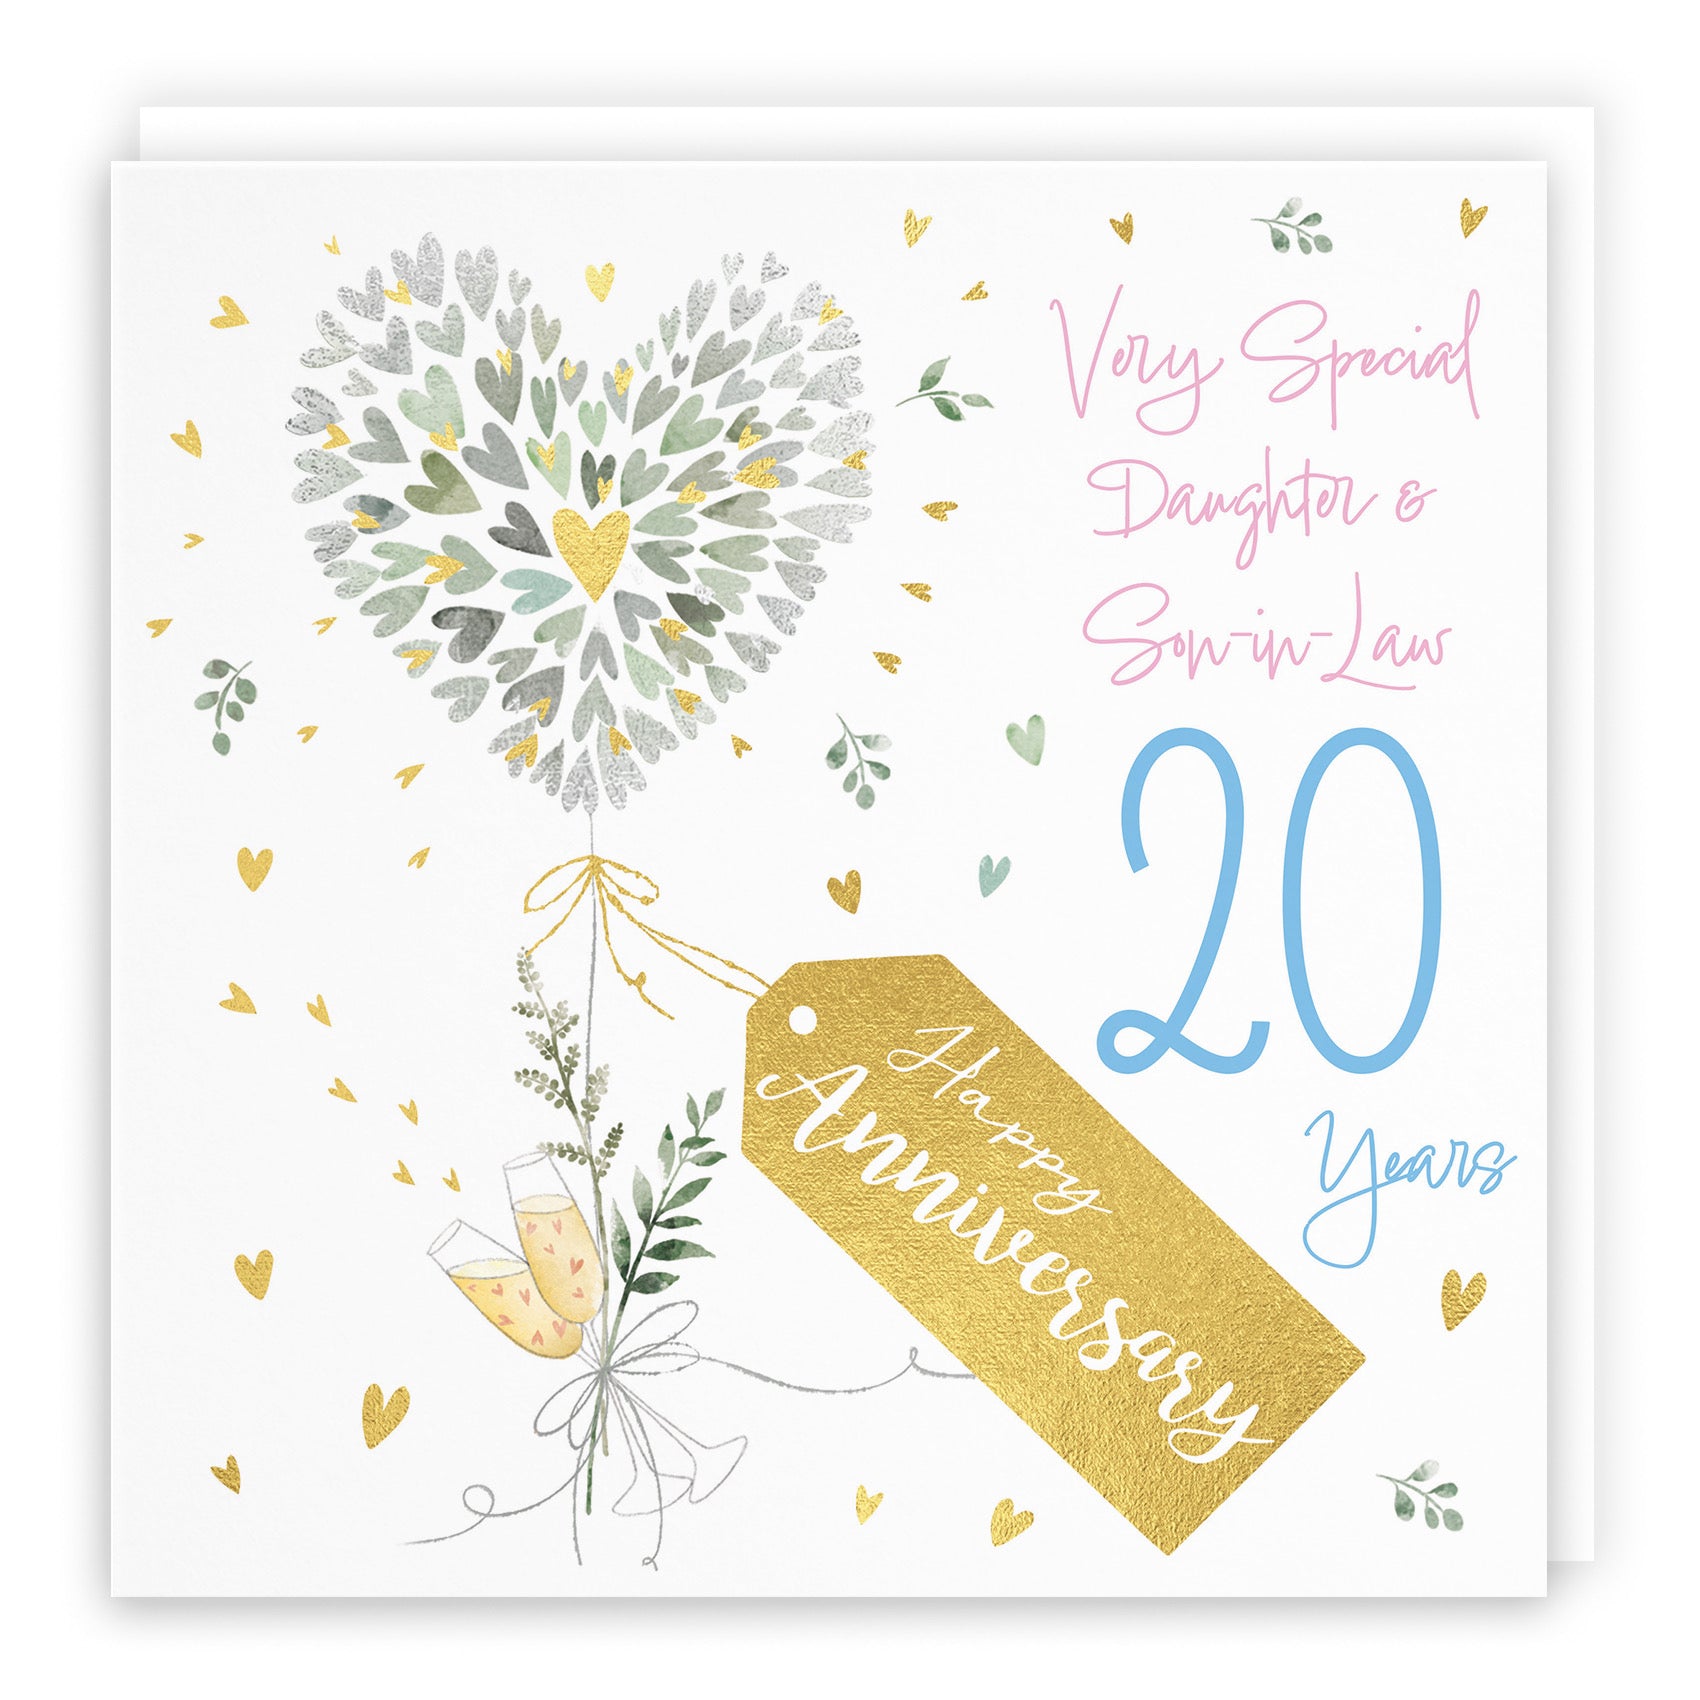 Daughter And Son-in-Law 20th Anniversary Card Contemporary Hearts Milo's Gallery - Default Title (B0CKJ3PLFB)